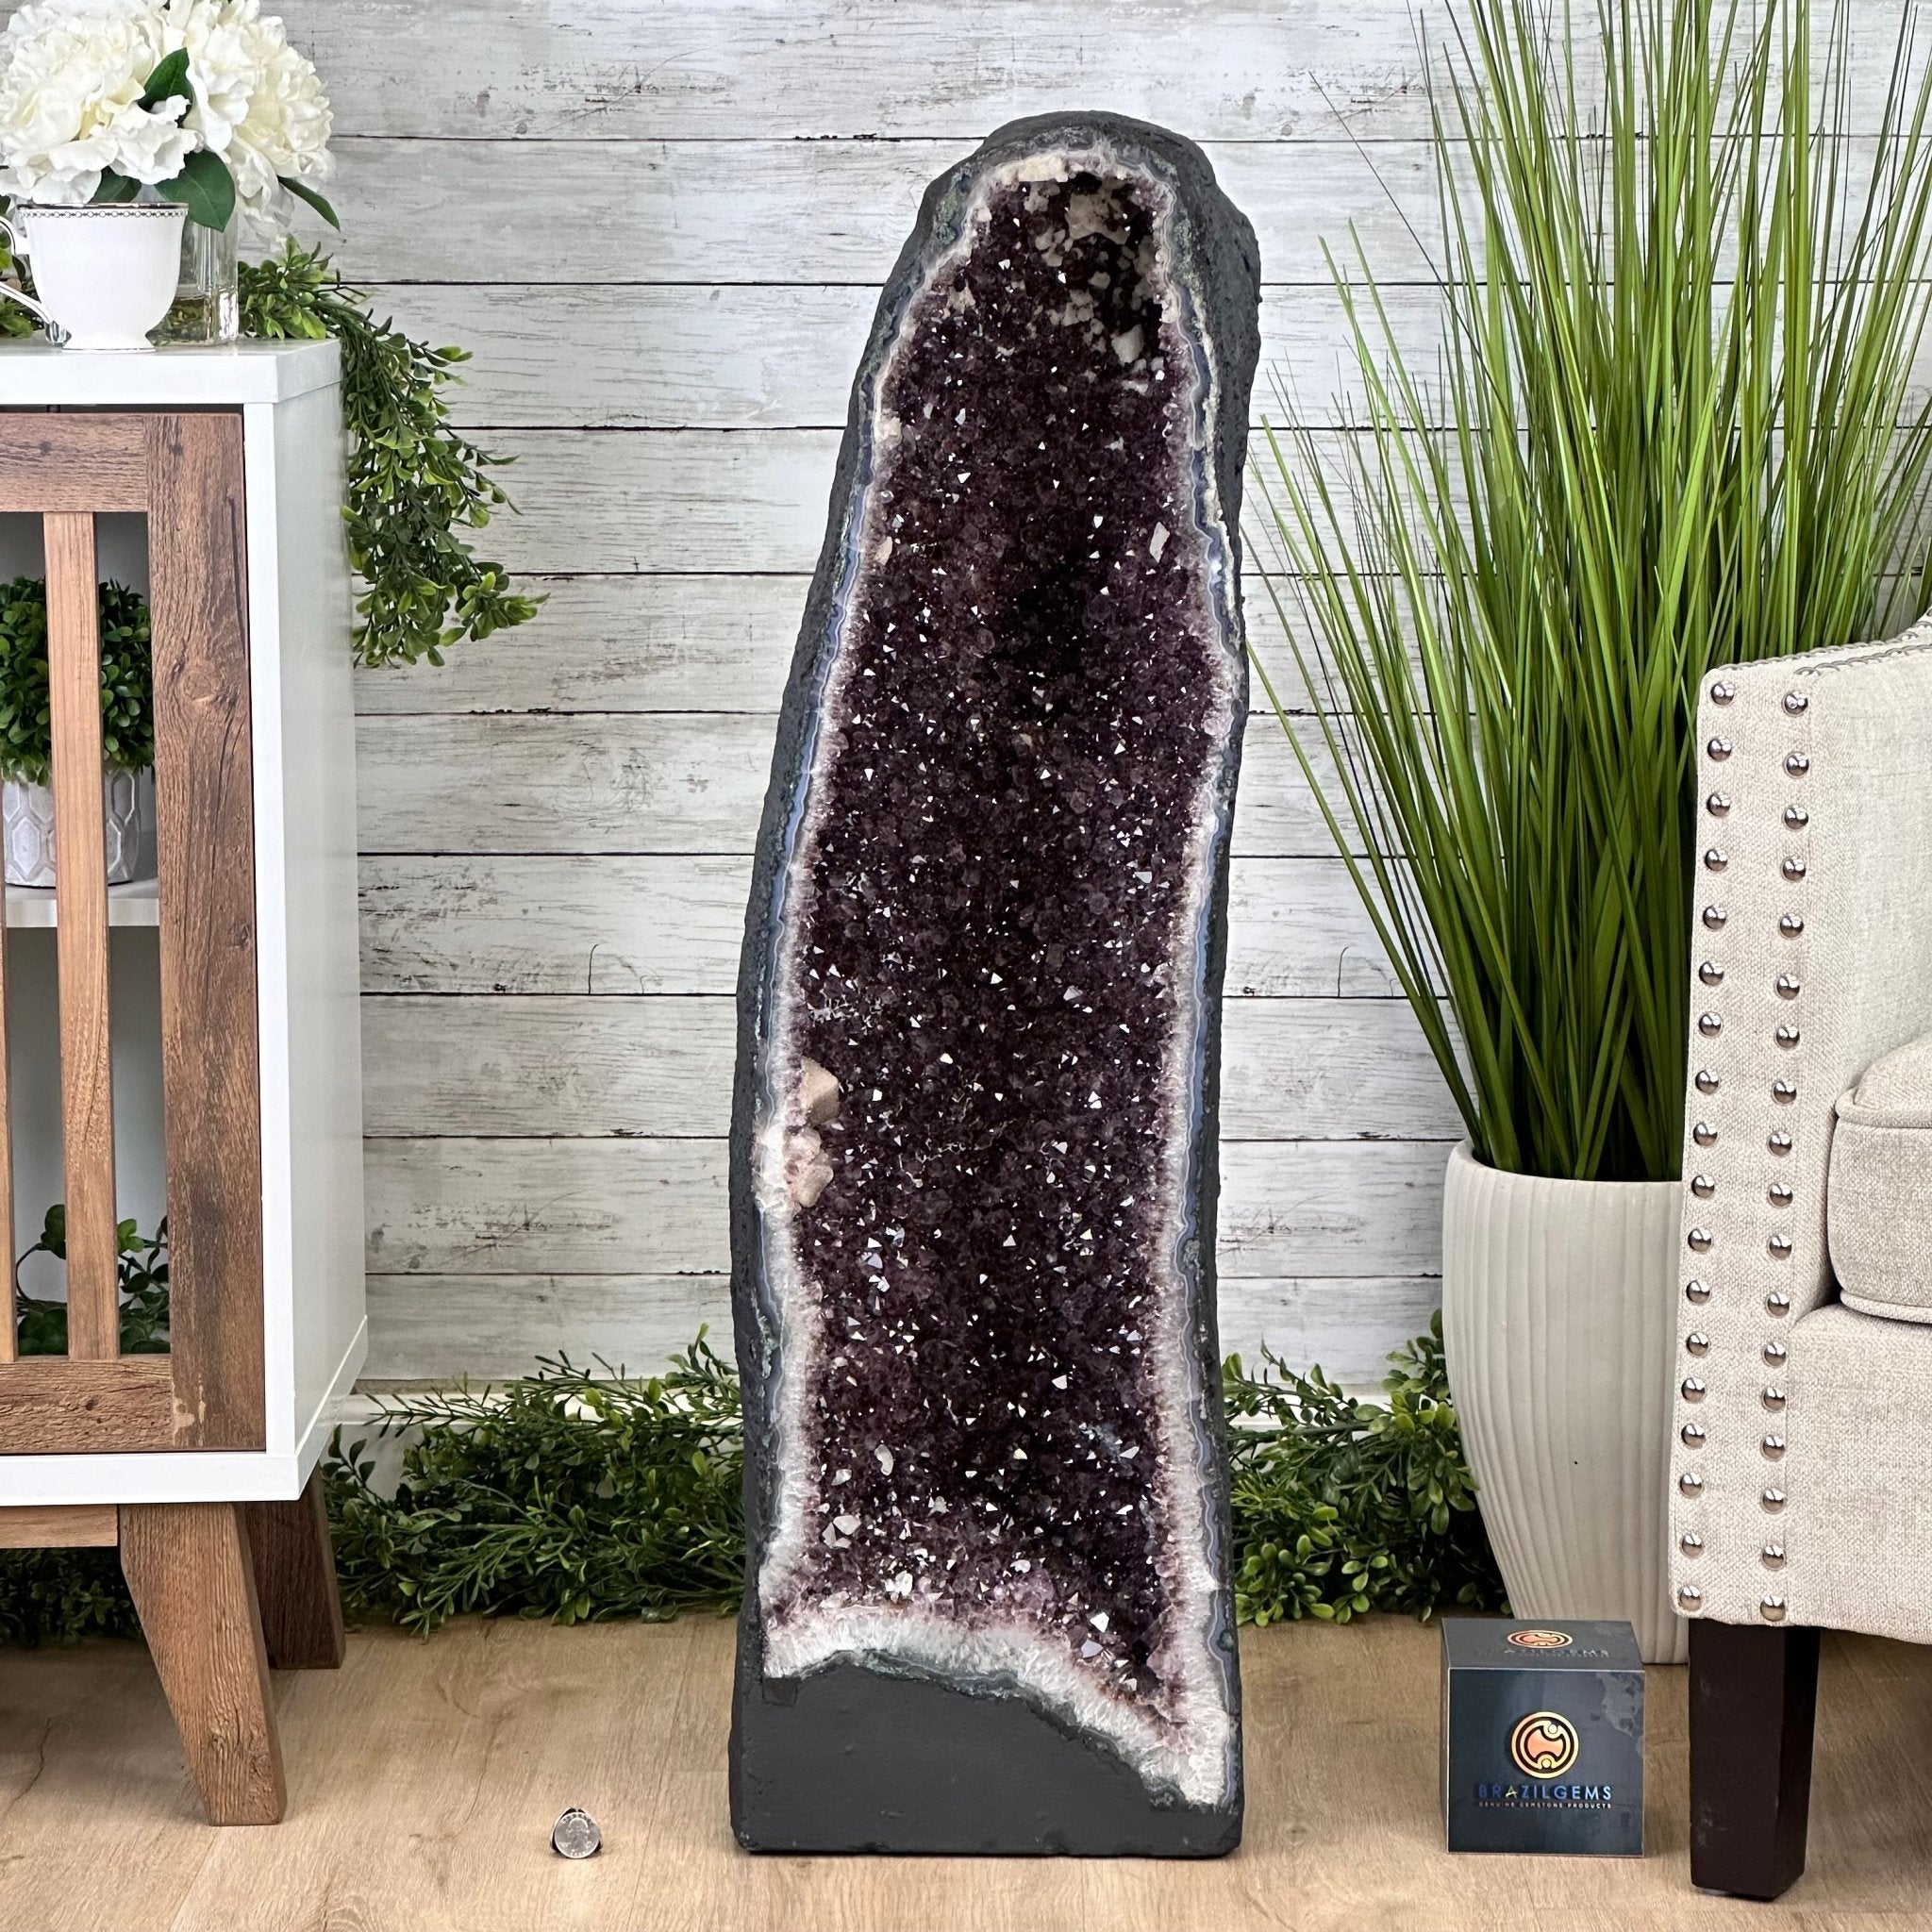 Extra Quality Brazilian Amethyst Cathedral, 131 lbs & 36" Tall #5601-1269 - Brazil GemsBrazil GemsExtra Quality Brazilian Amethyst Cathedral, 131 lbs & 36" Tall #5601-1269Cathedrals5601-1269